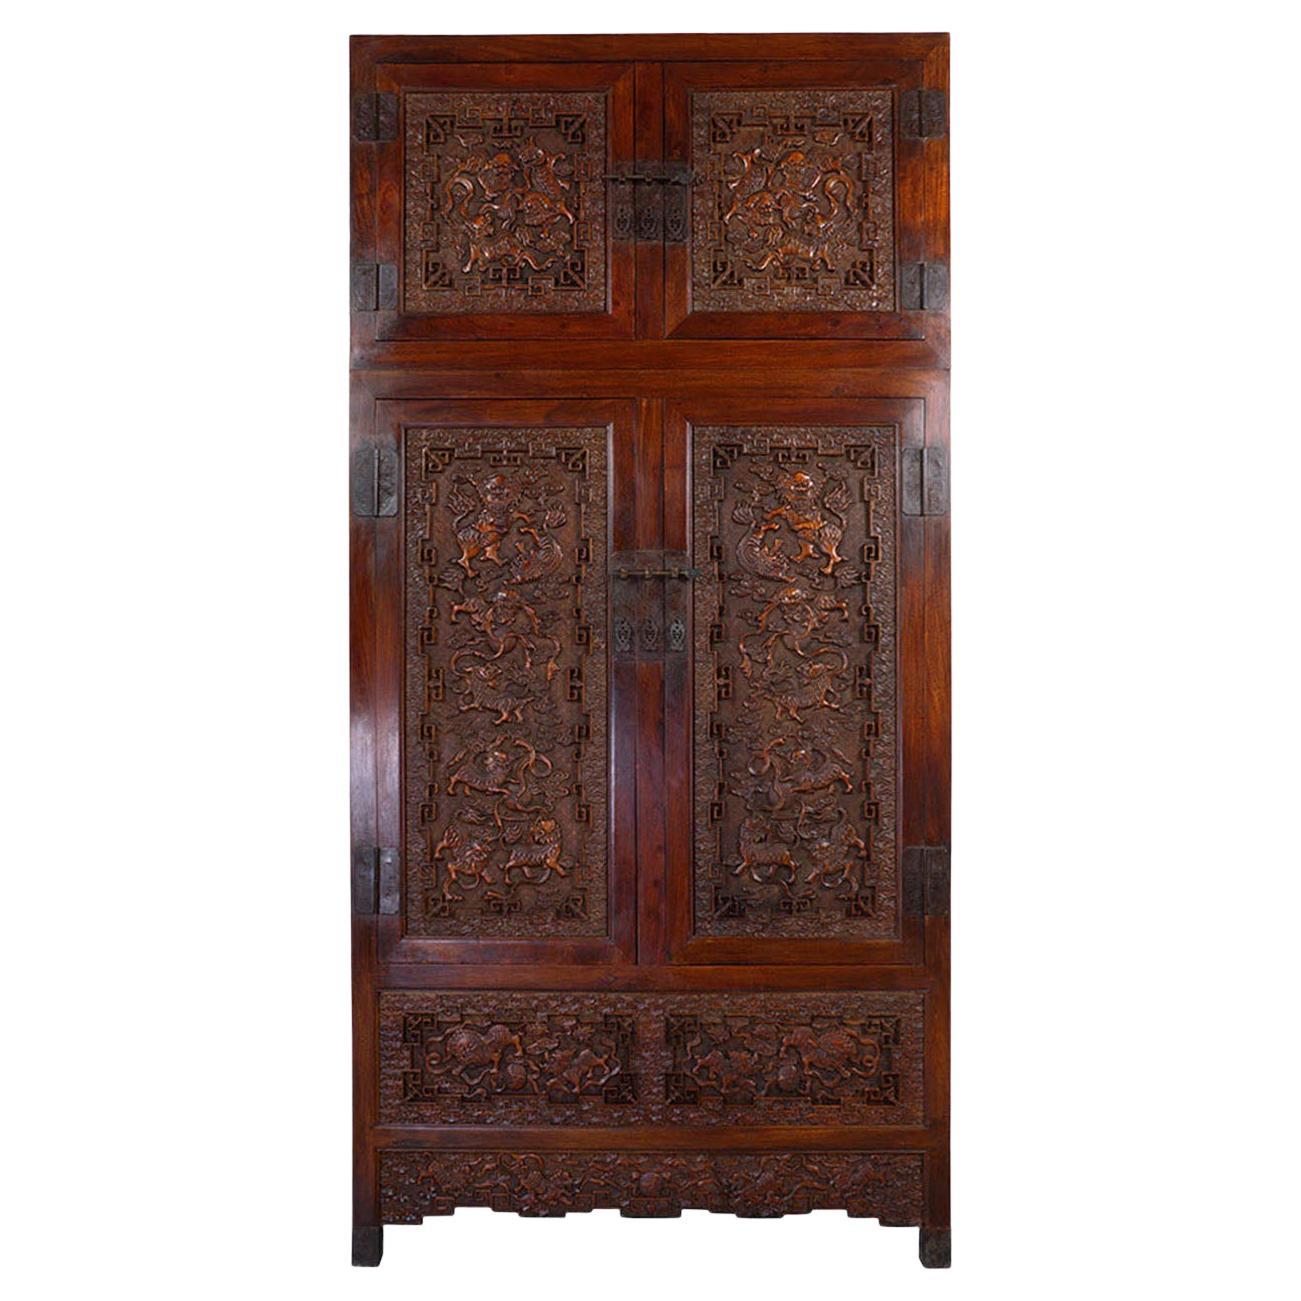 Antique Chinese Massive Carved Camphor Wood Compound Cabinet, Wardrobe